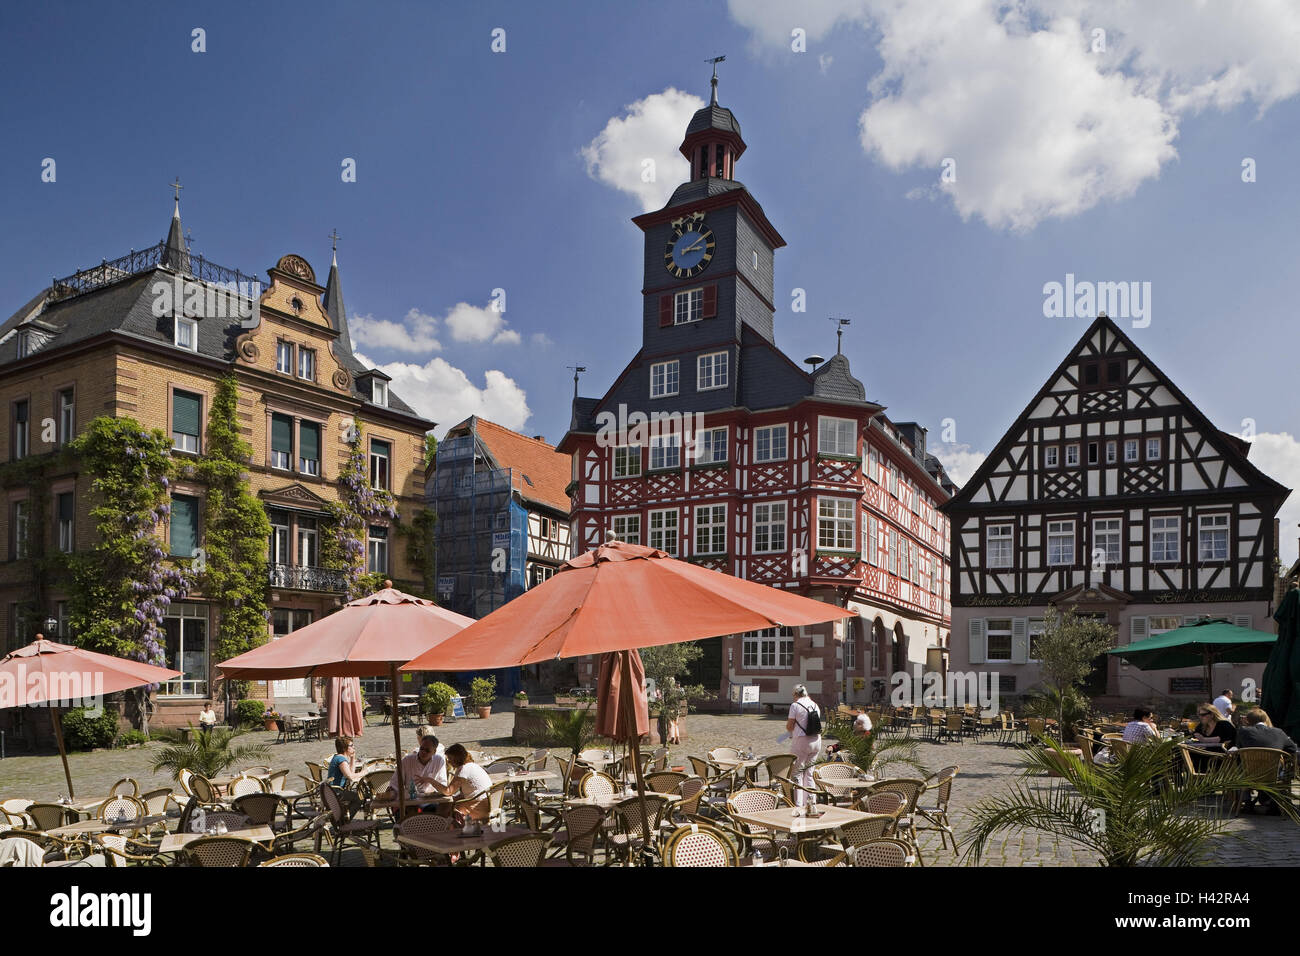 Germany, Hessen, home Heppen, marketplace, city hall, street cafe, town, architecture, building, half-timbered, market, half-timbered houses, half-timbered architecture, city hall tower, architecture, historically, cafe, sunshades, people, guests, outside, sunny, Stock Photo